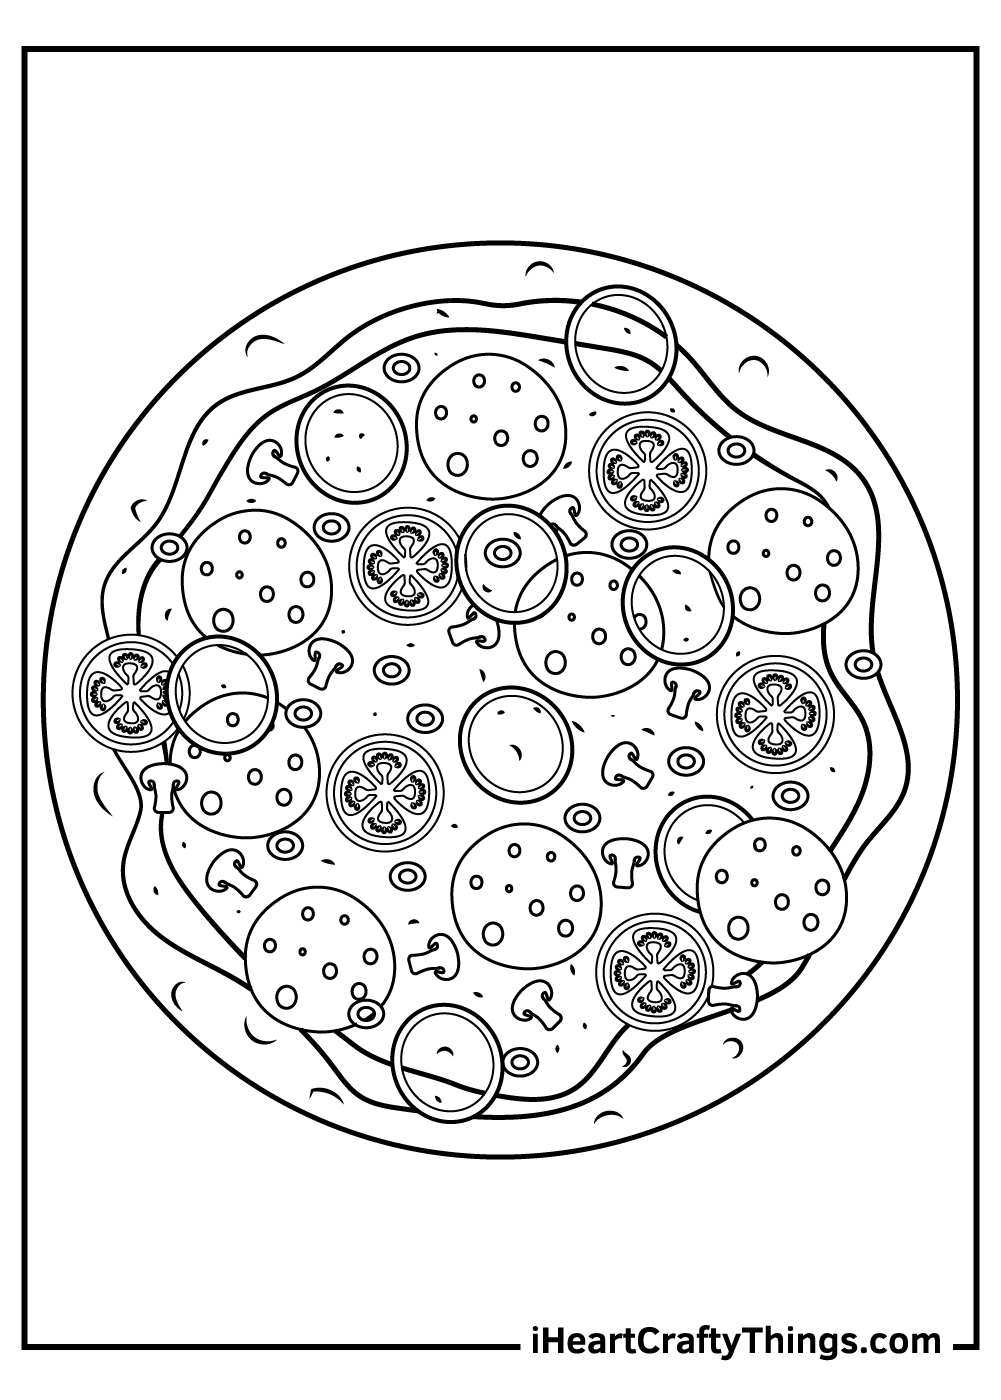 Pizza coloring pages updated